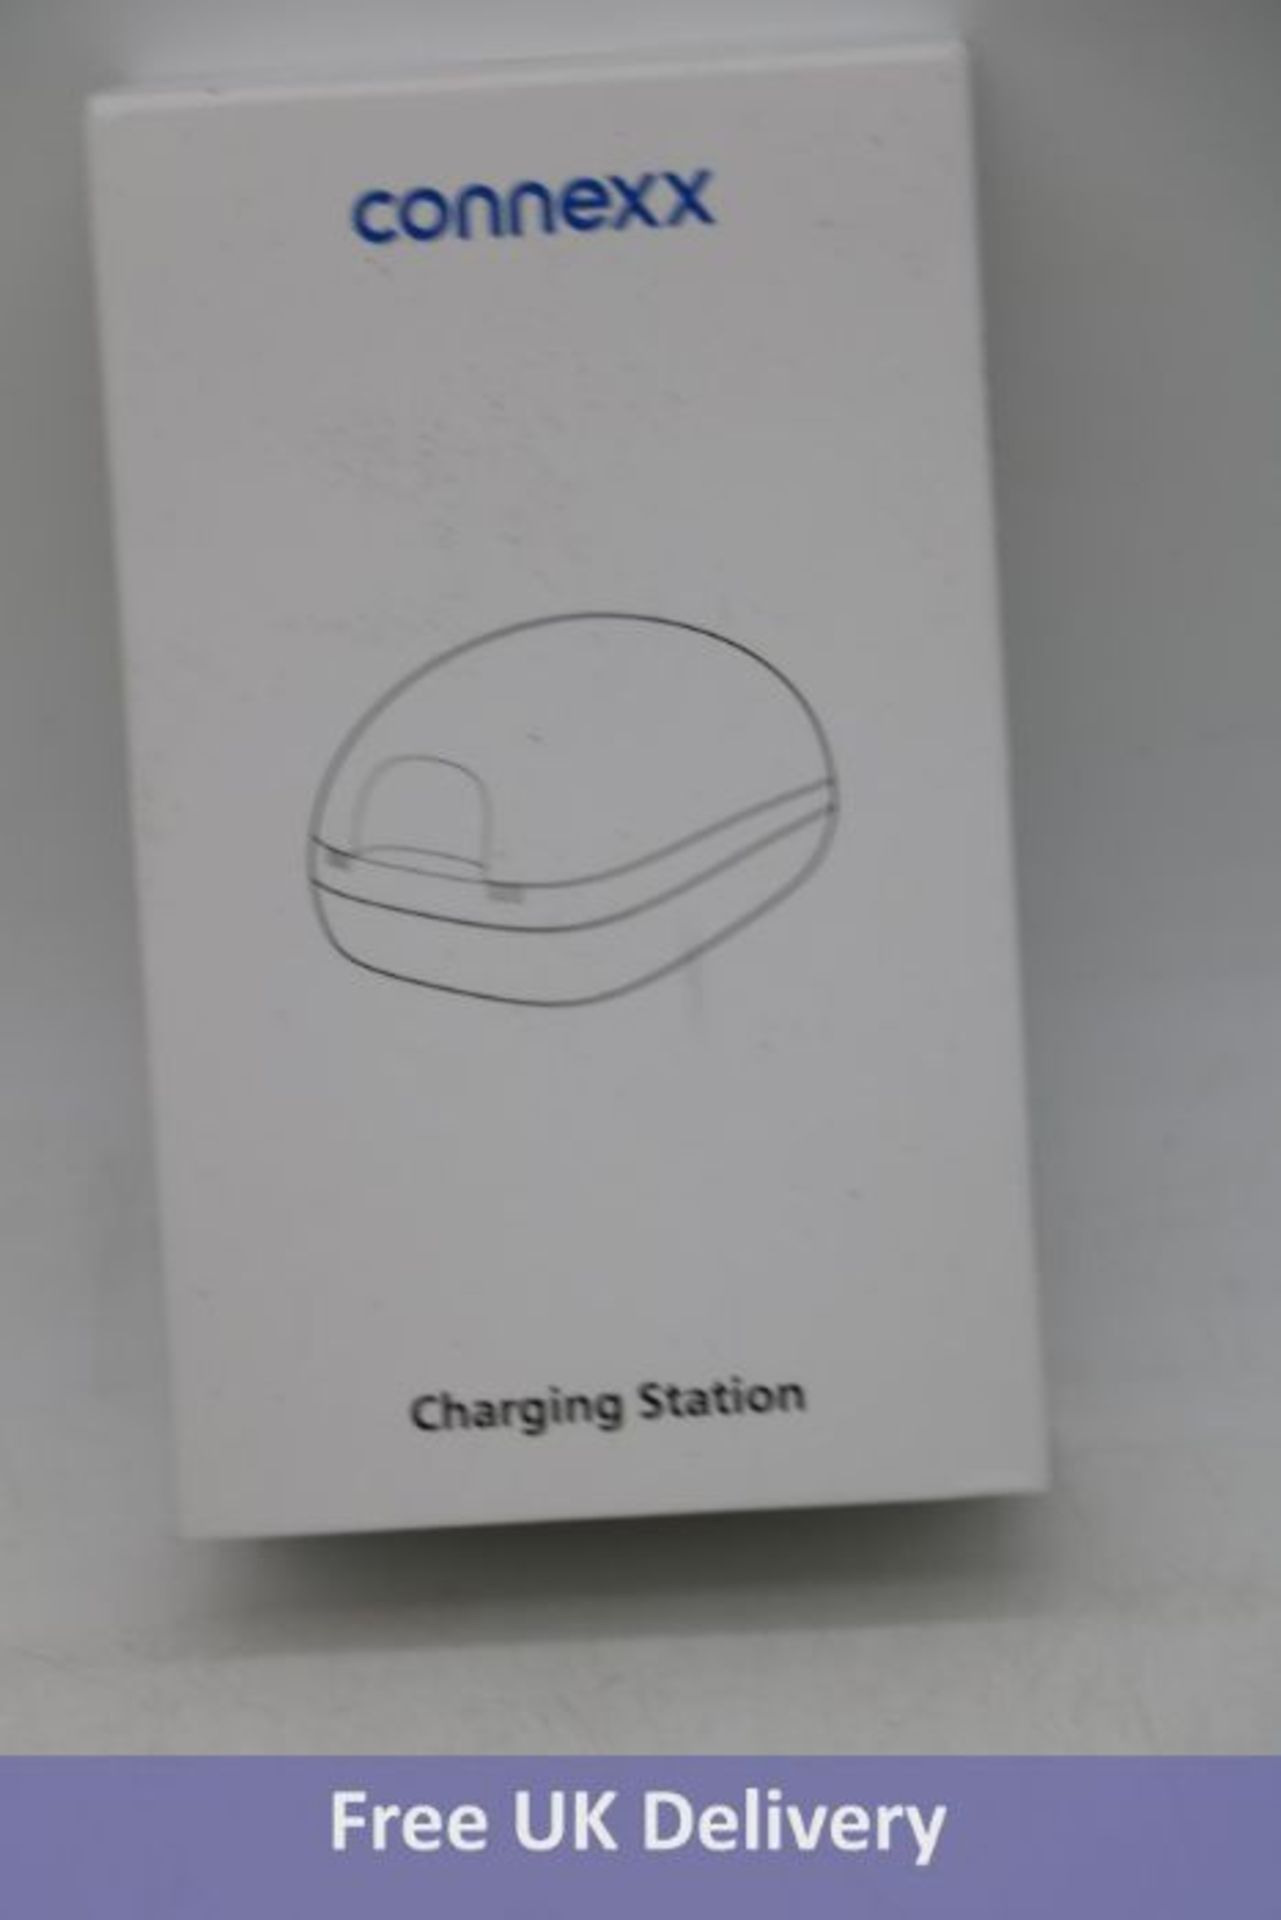 Connexx Hearing Aid Charging Station